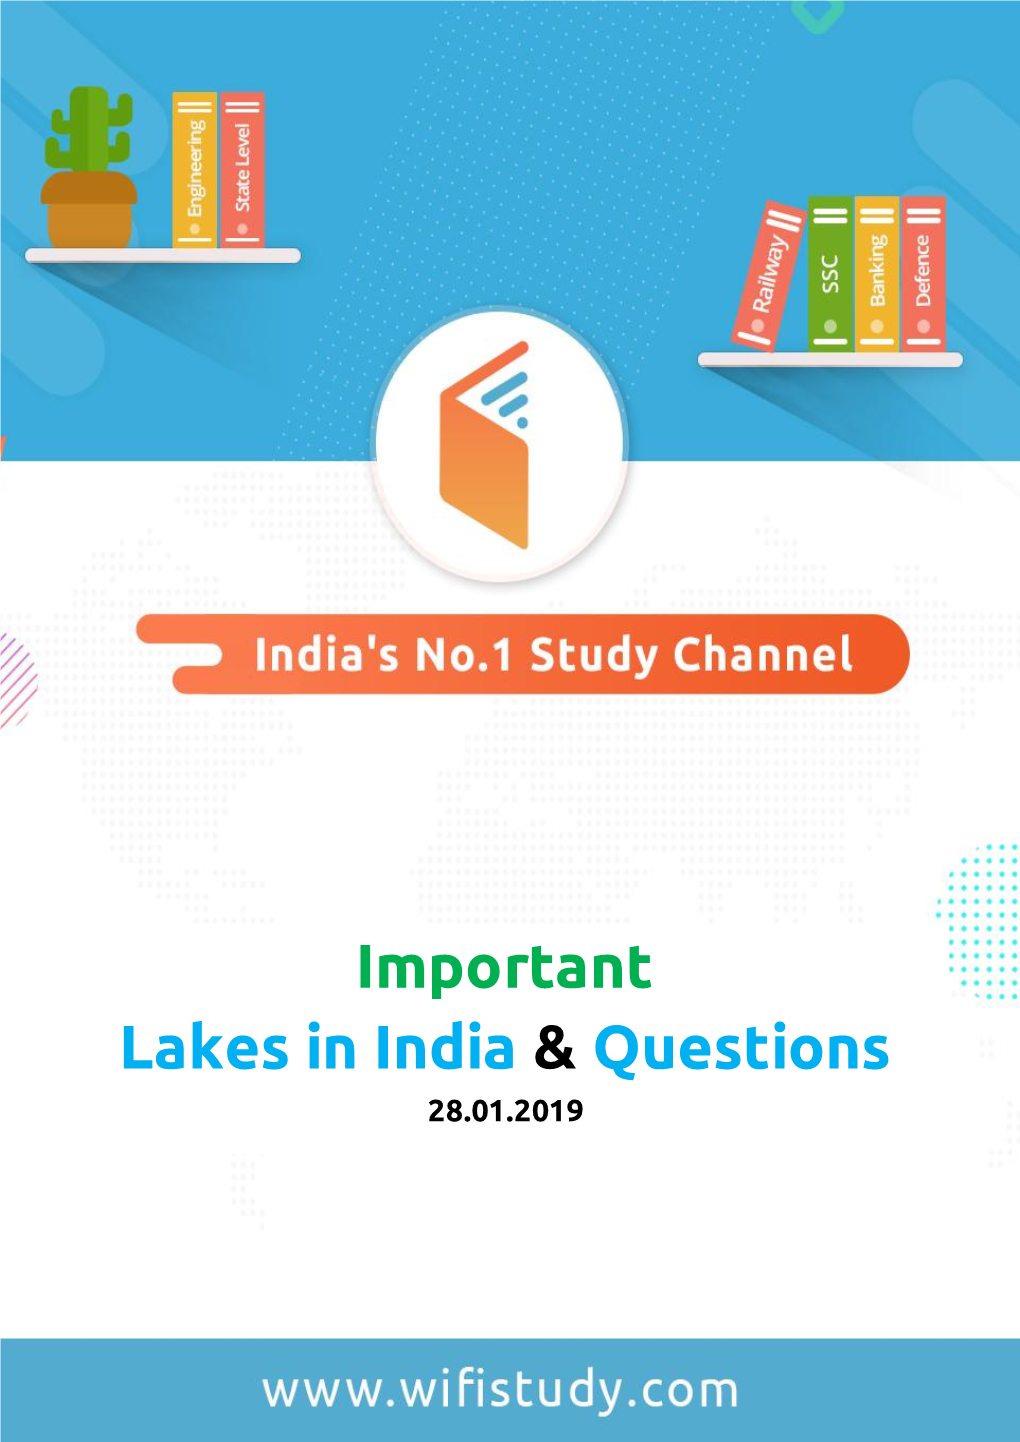 Important Lakes in India & Questions